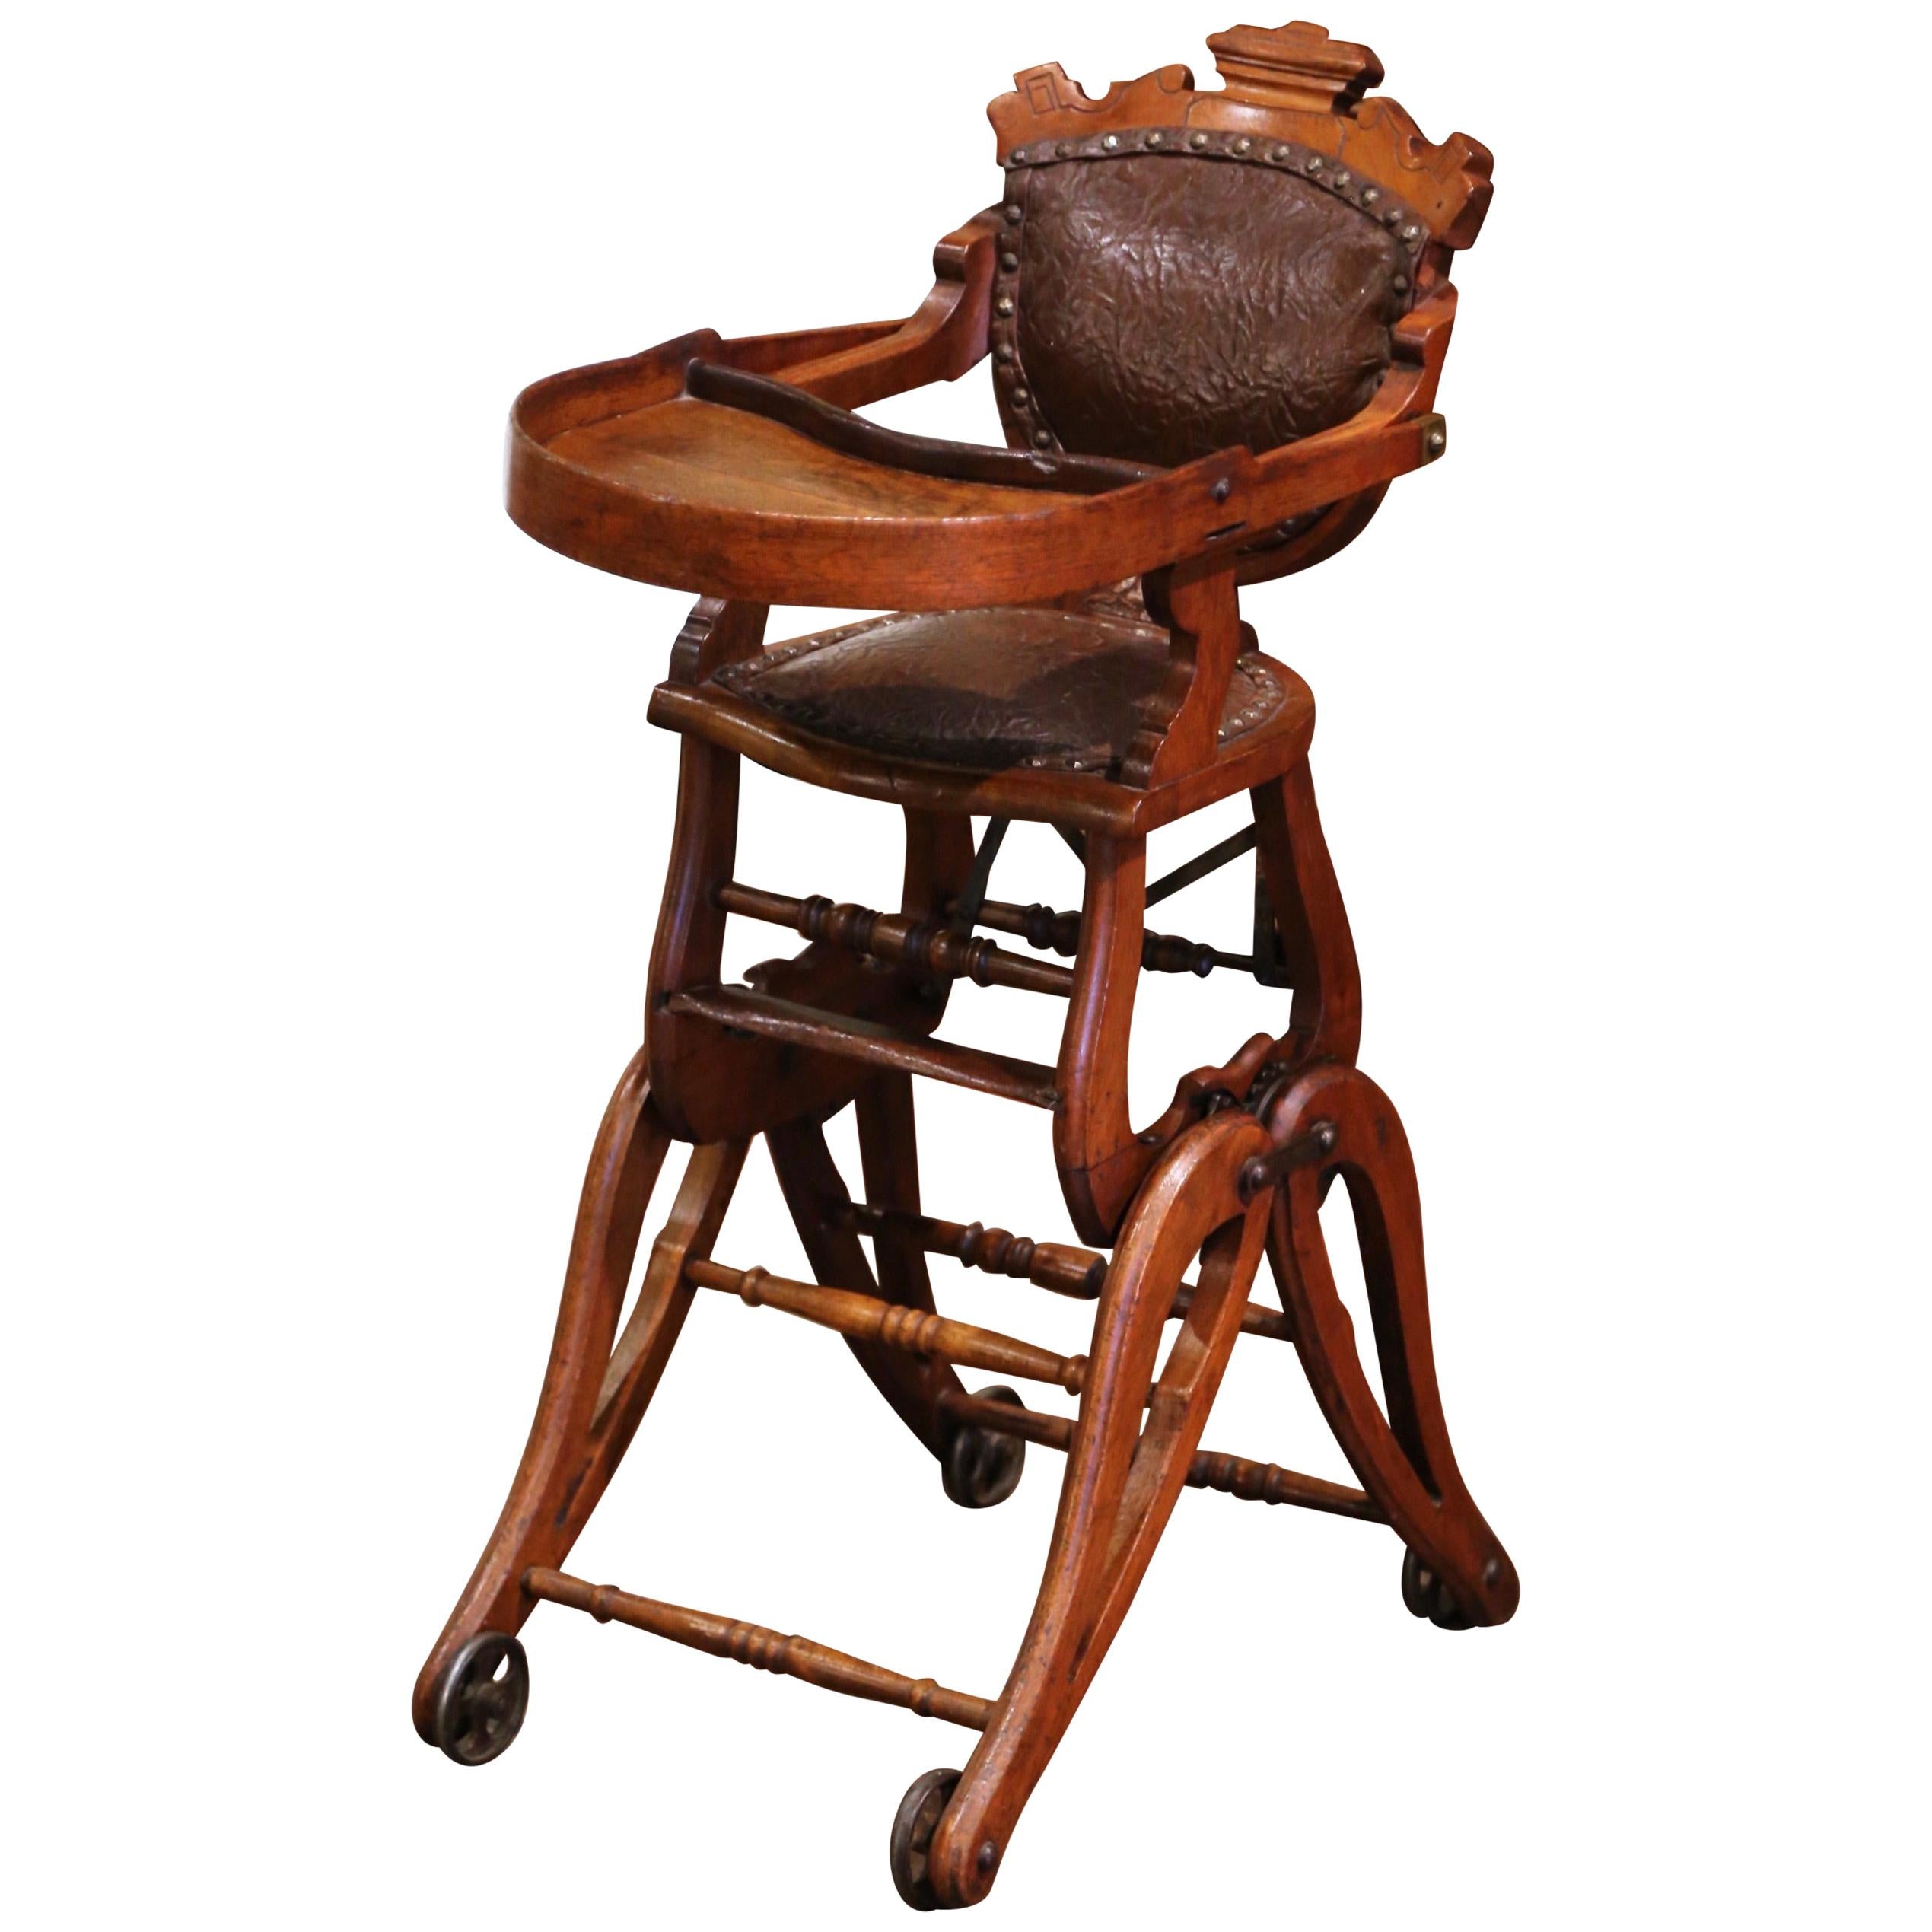 19th Century English Carved Walnut and Leather Adjustable High Chair Rocker